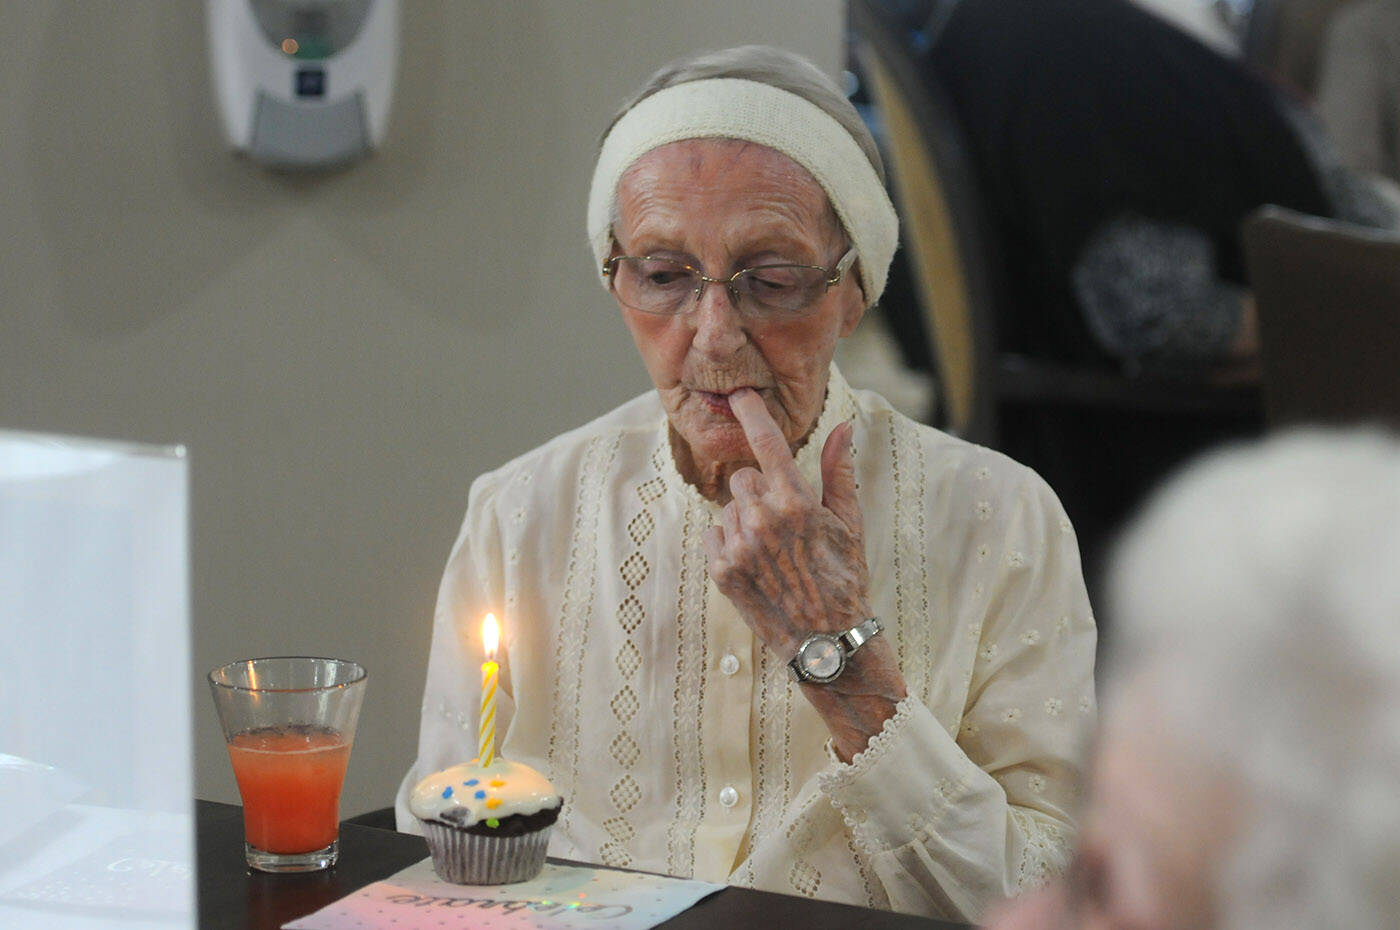 Hedy Sutulov tastes the icing on her cupcake while celebrating her 108th birthday with her friends on Aug. 10, 2022 at Chartwell Birchwood Retirement Residence where she lives. She turned 108 on Aug. 18, 2022. (Jenna Hauck/ Chilliwack Progress)